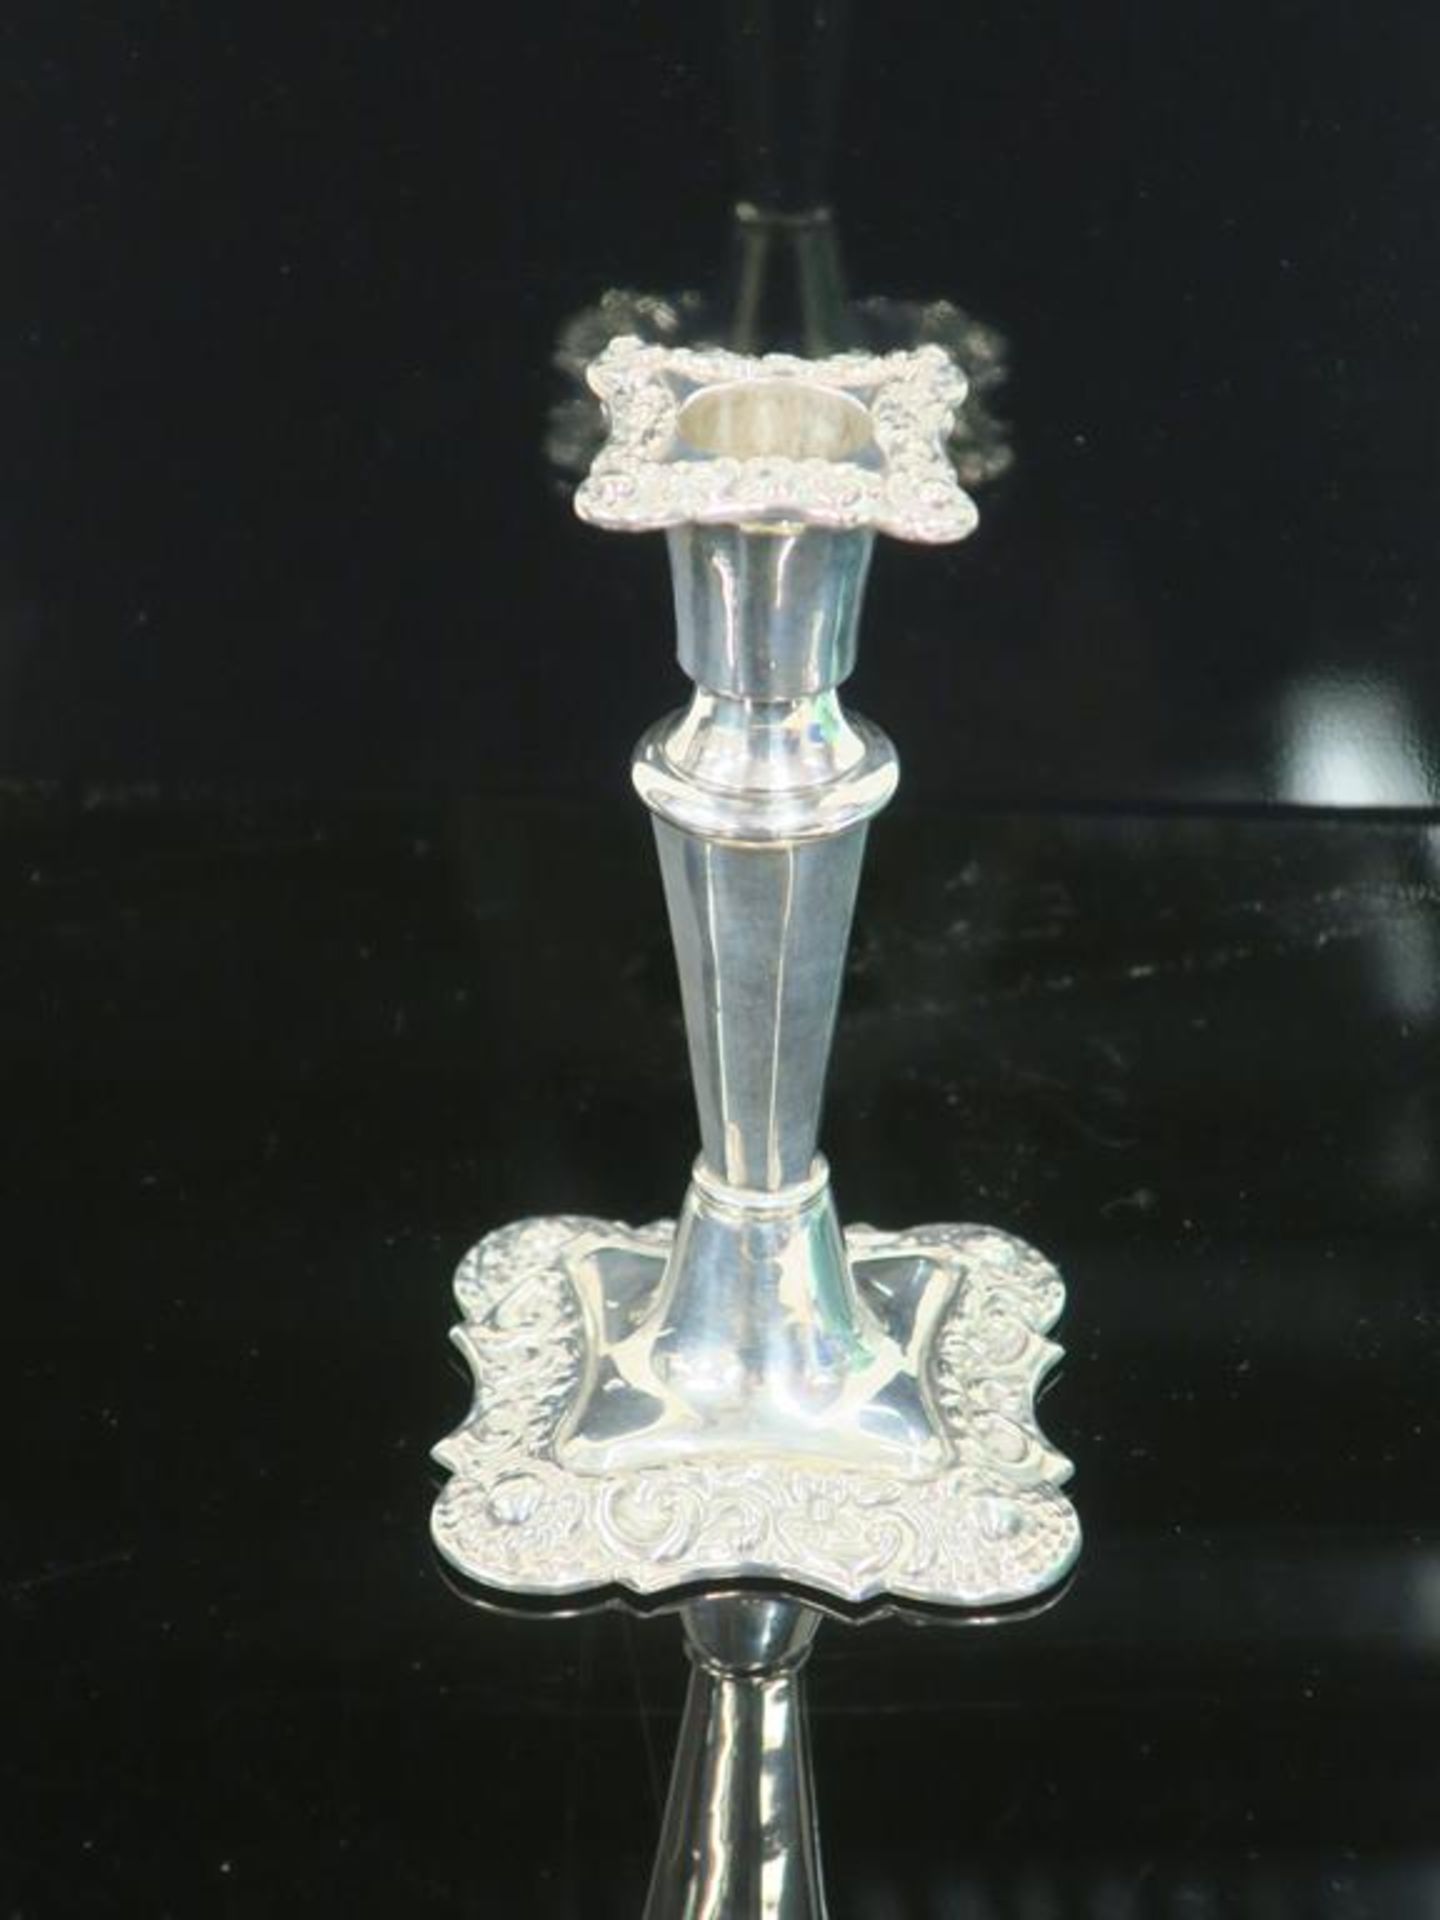 A Pair of Antique Silver Candle Sticks (London 1902) (2) (est £120-£180) - Image 3 of 3